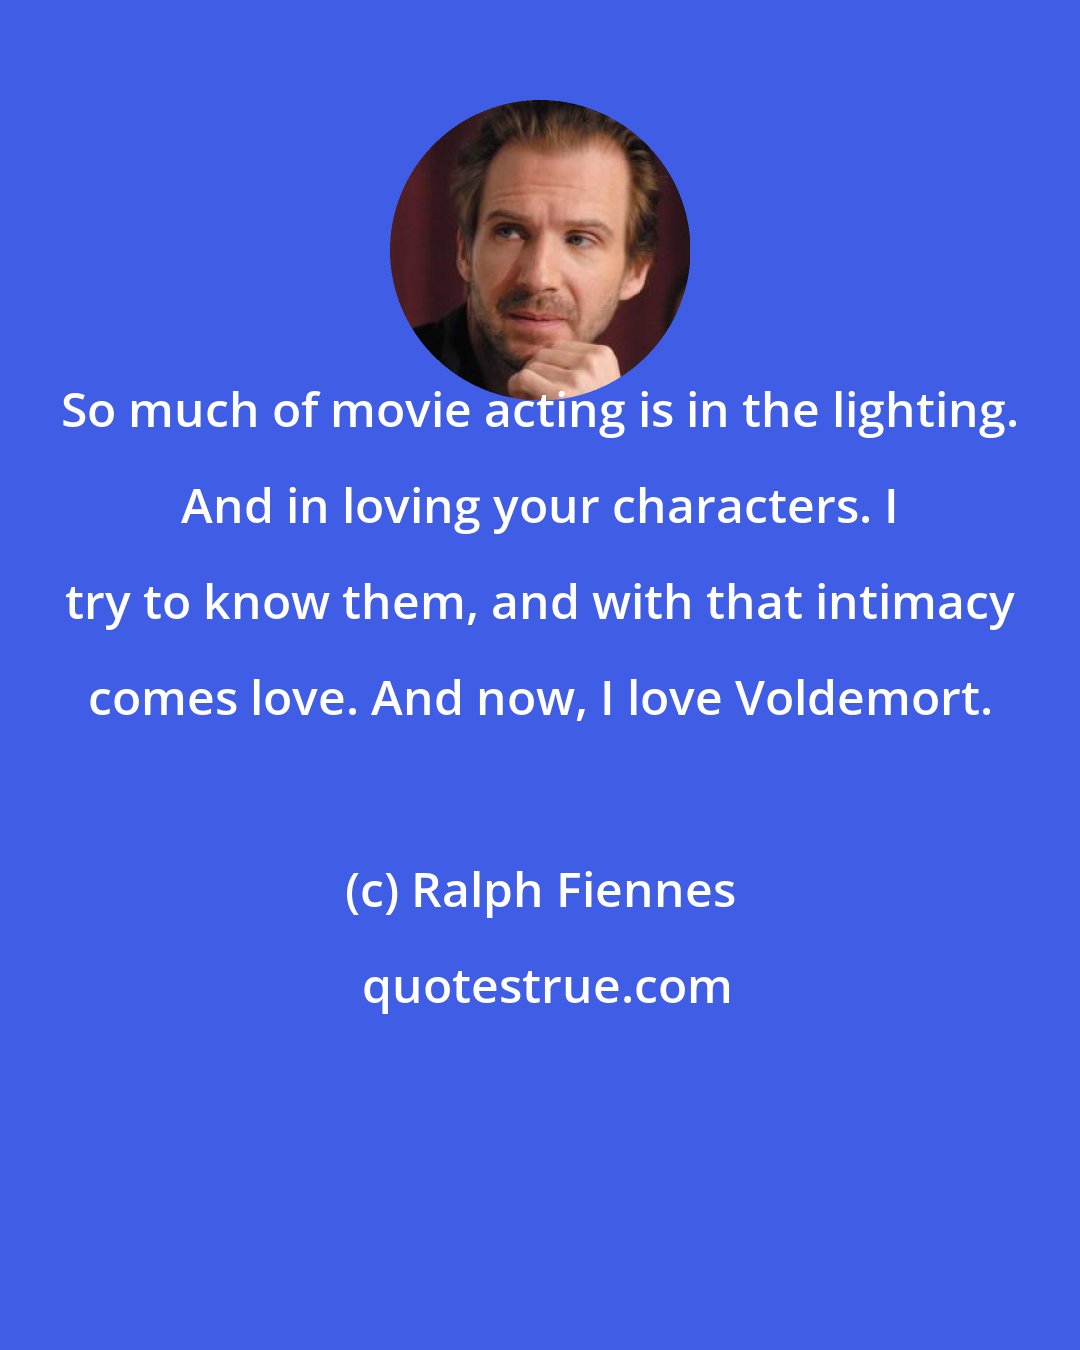 Ralph Fiennes: So much of movie acting is in the lighting. And in loving your characters. I try to know them, and with that intimacy comes love. And now, I love Voldemort.